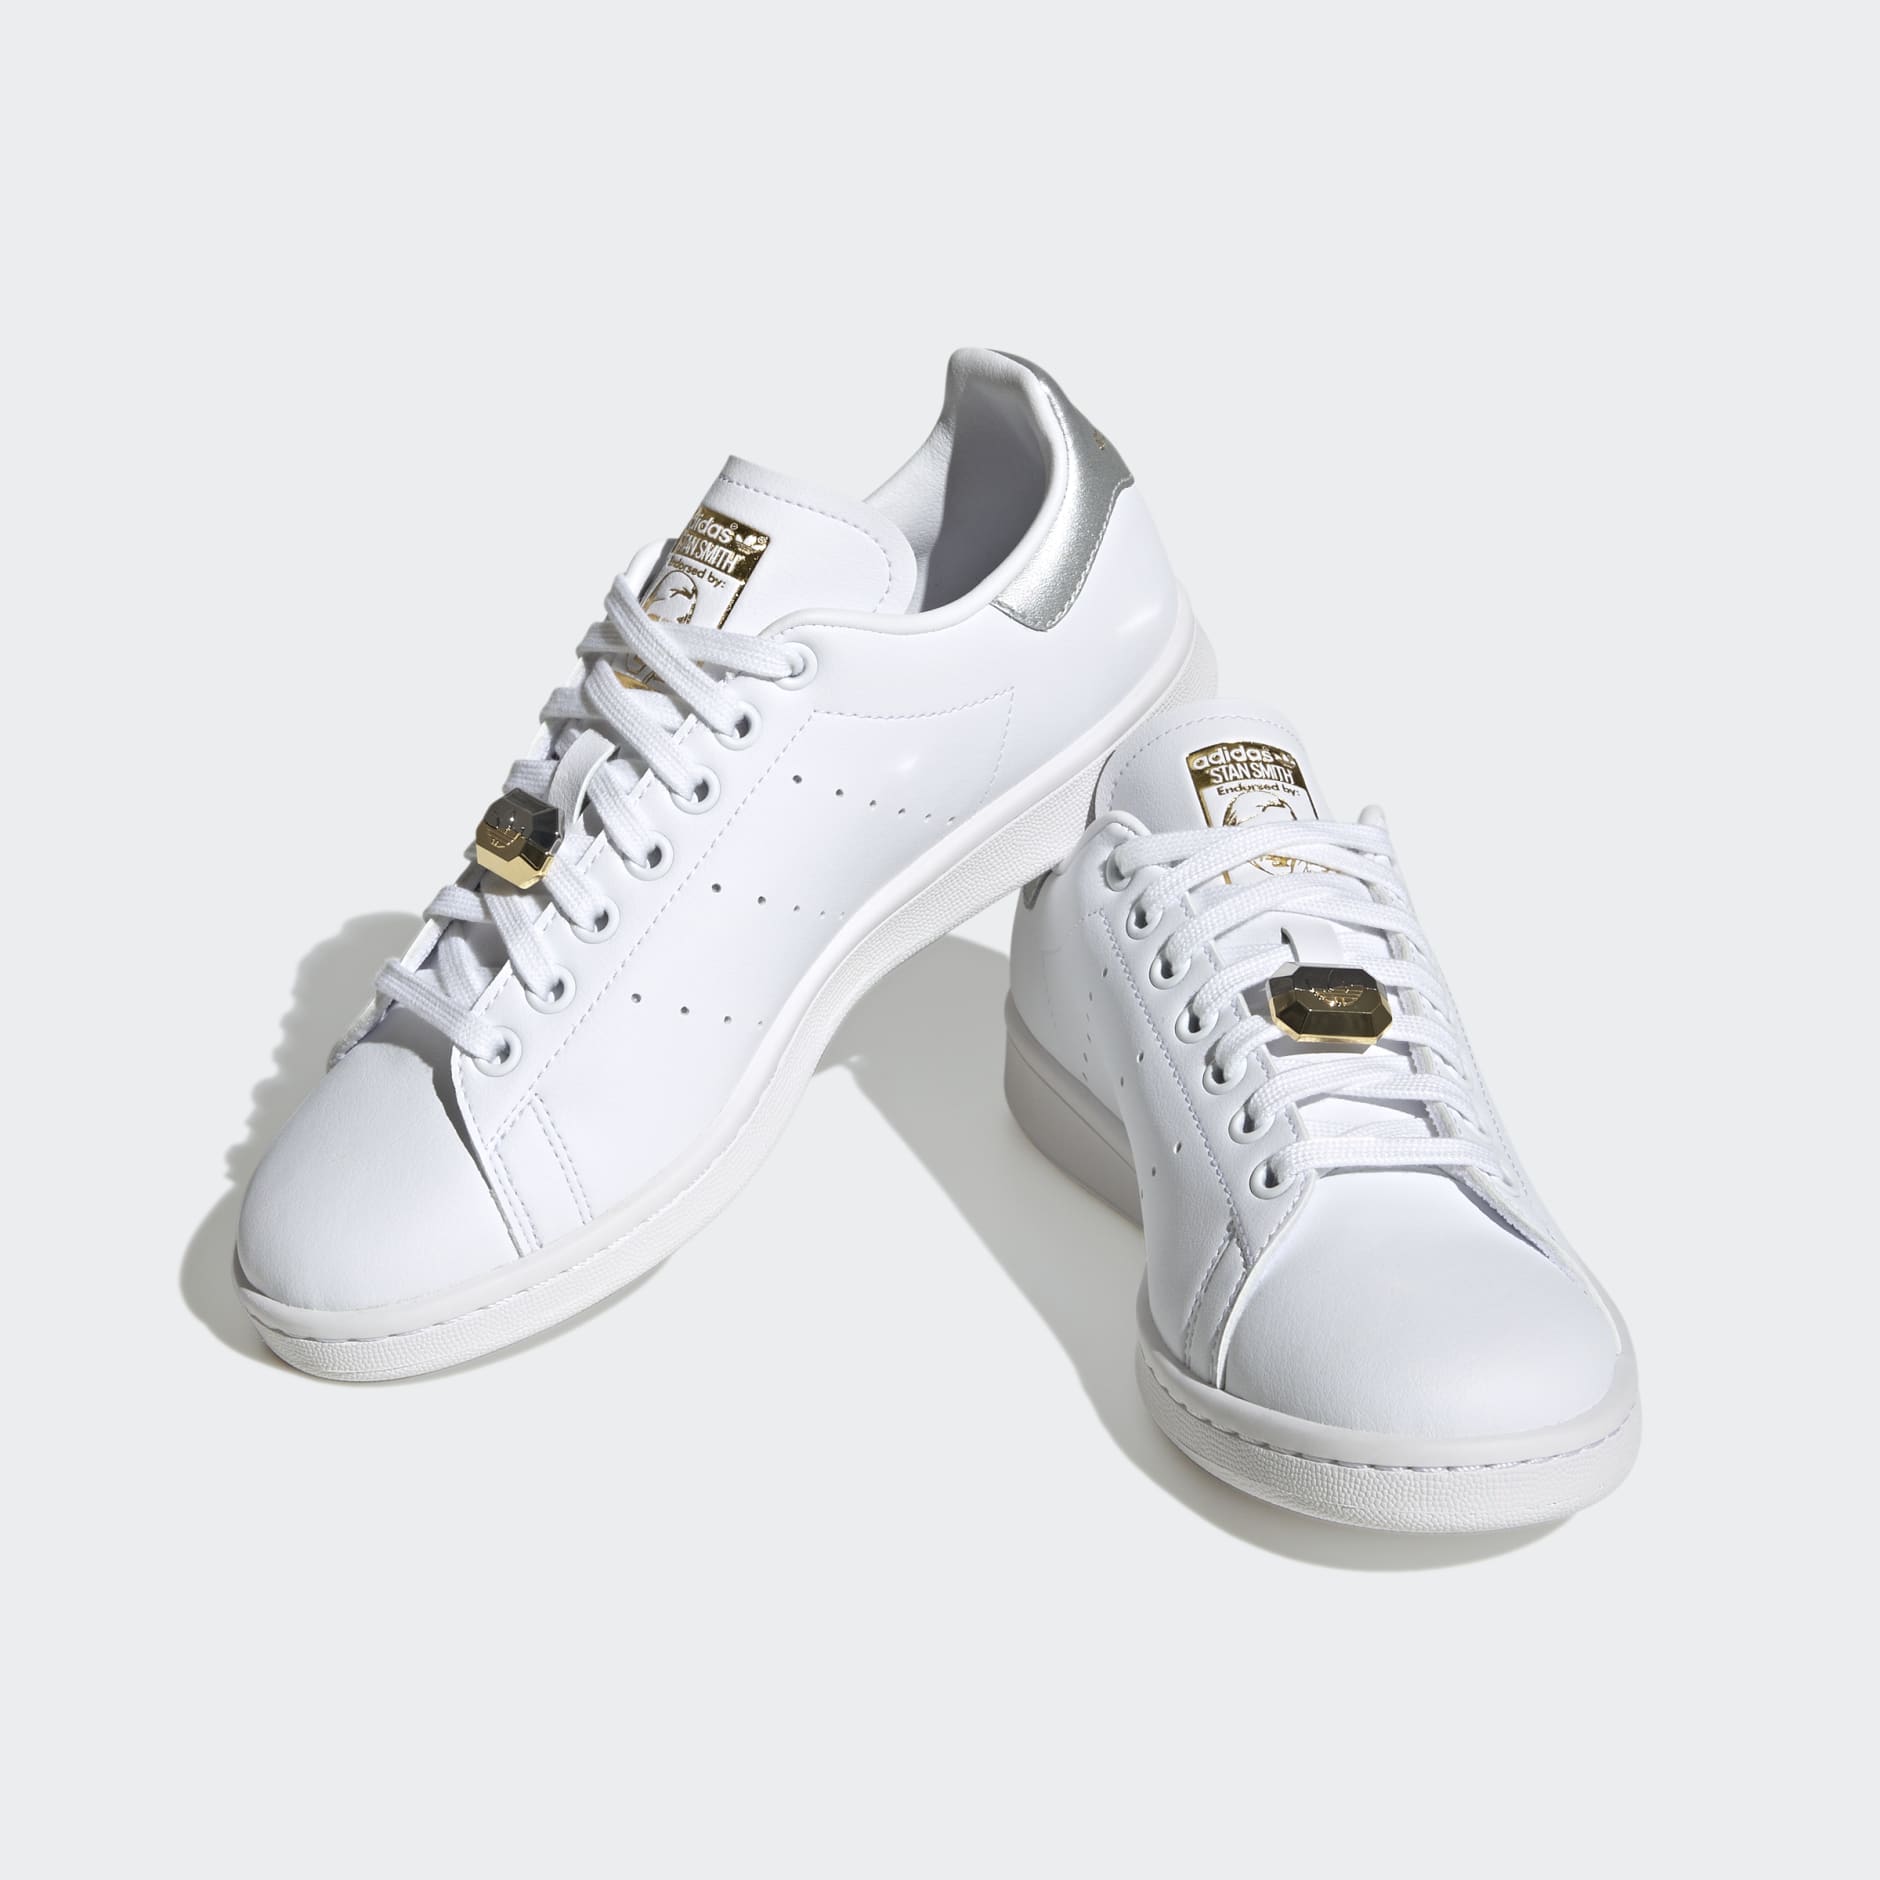 verbinding verbroken cafe zoom adidas Stan Smith Shoes - White | adidas OM